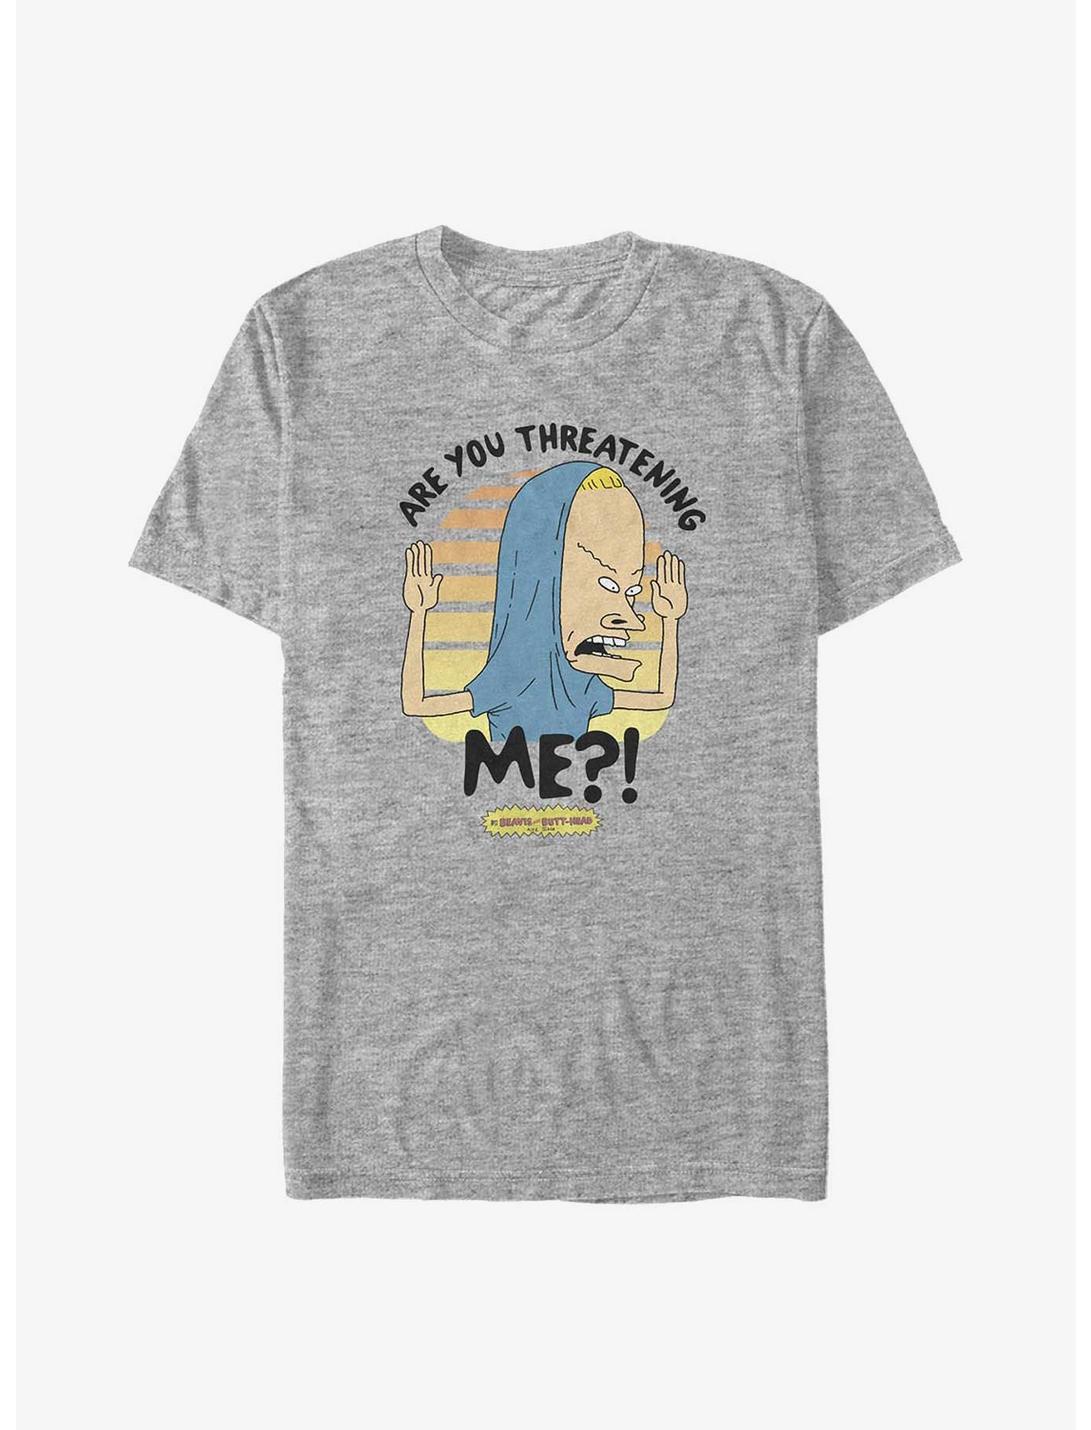 Beavis and Butt-Head Are You Threatening Me? Big & Tall T-Shirt, ATH HTR, hi-res